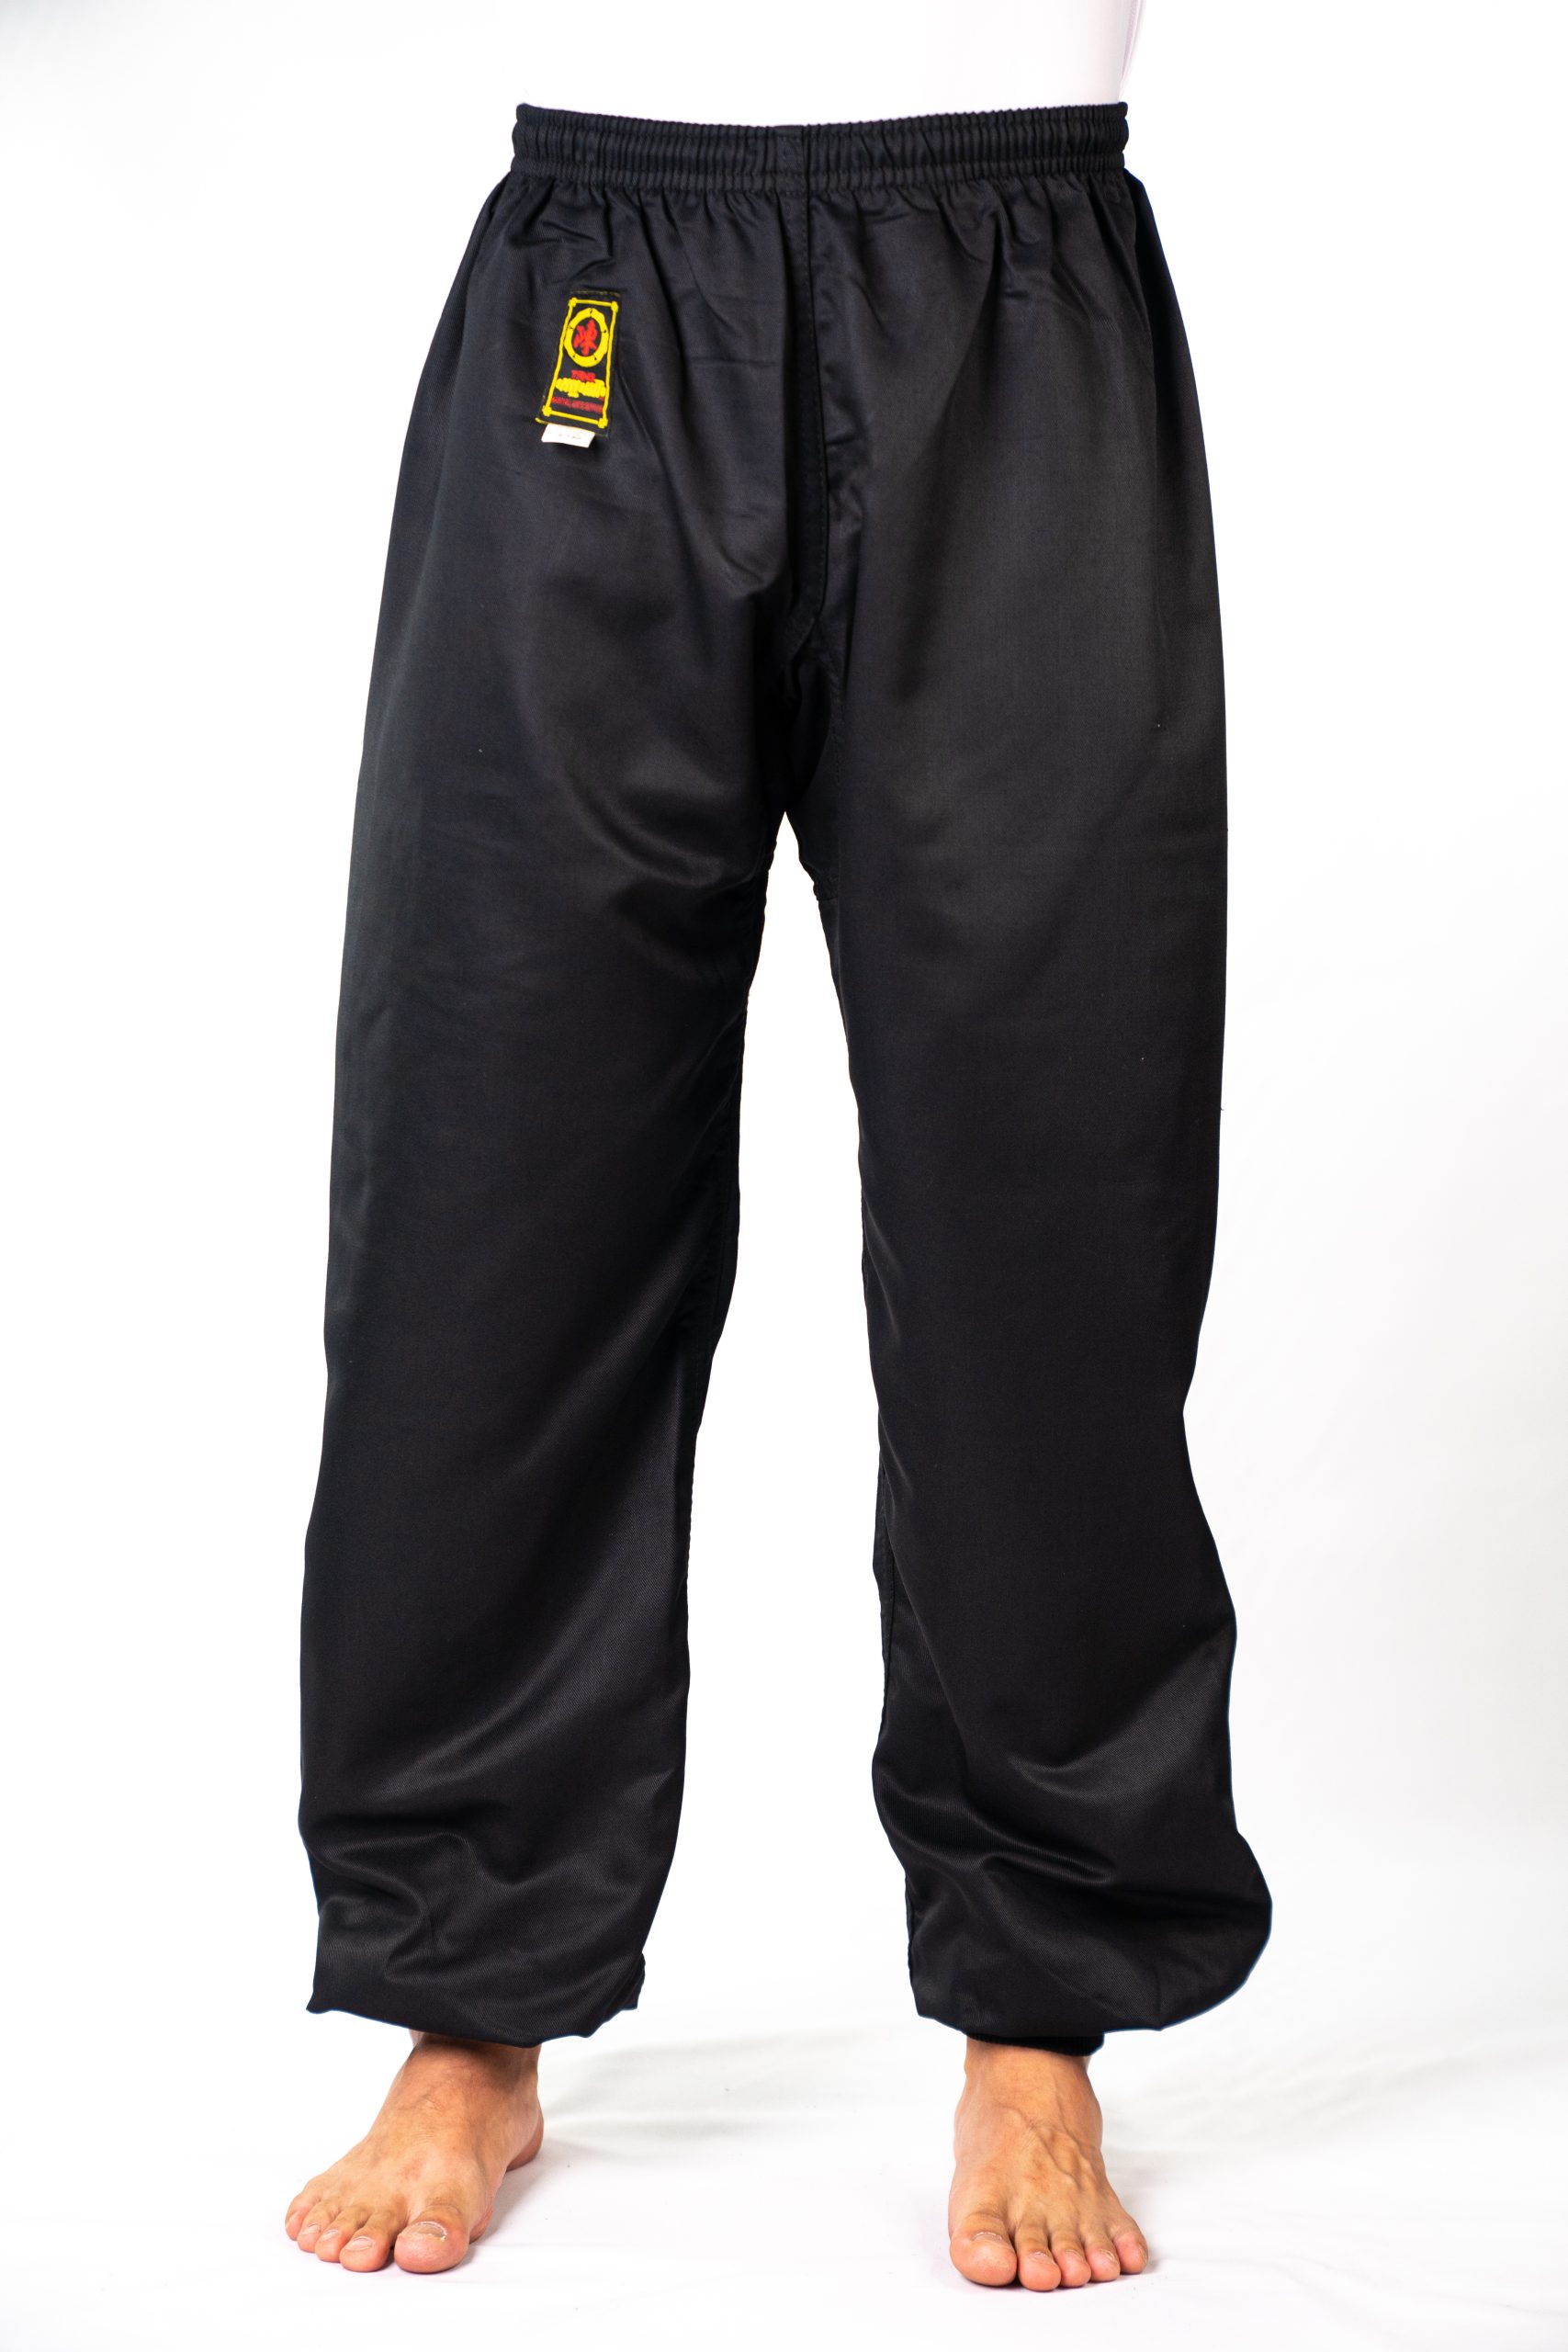 Pants | Martial Arts Training And Competition Apparel | AWMA